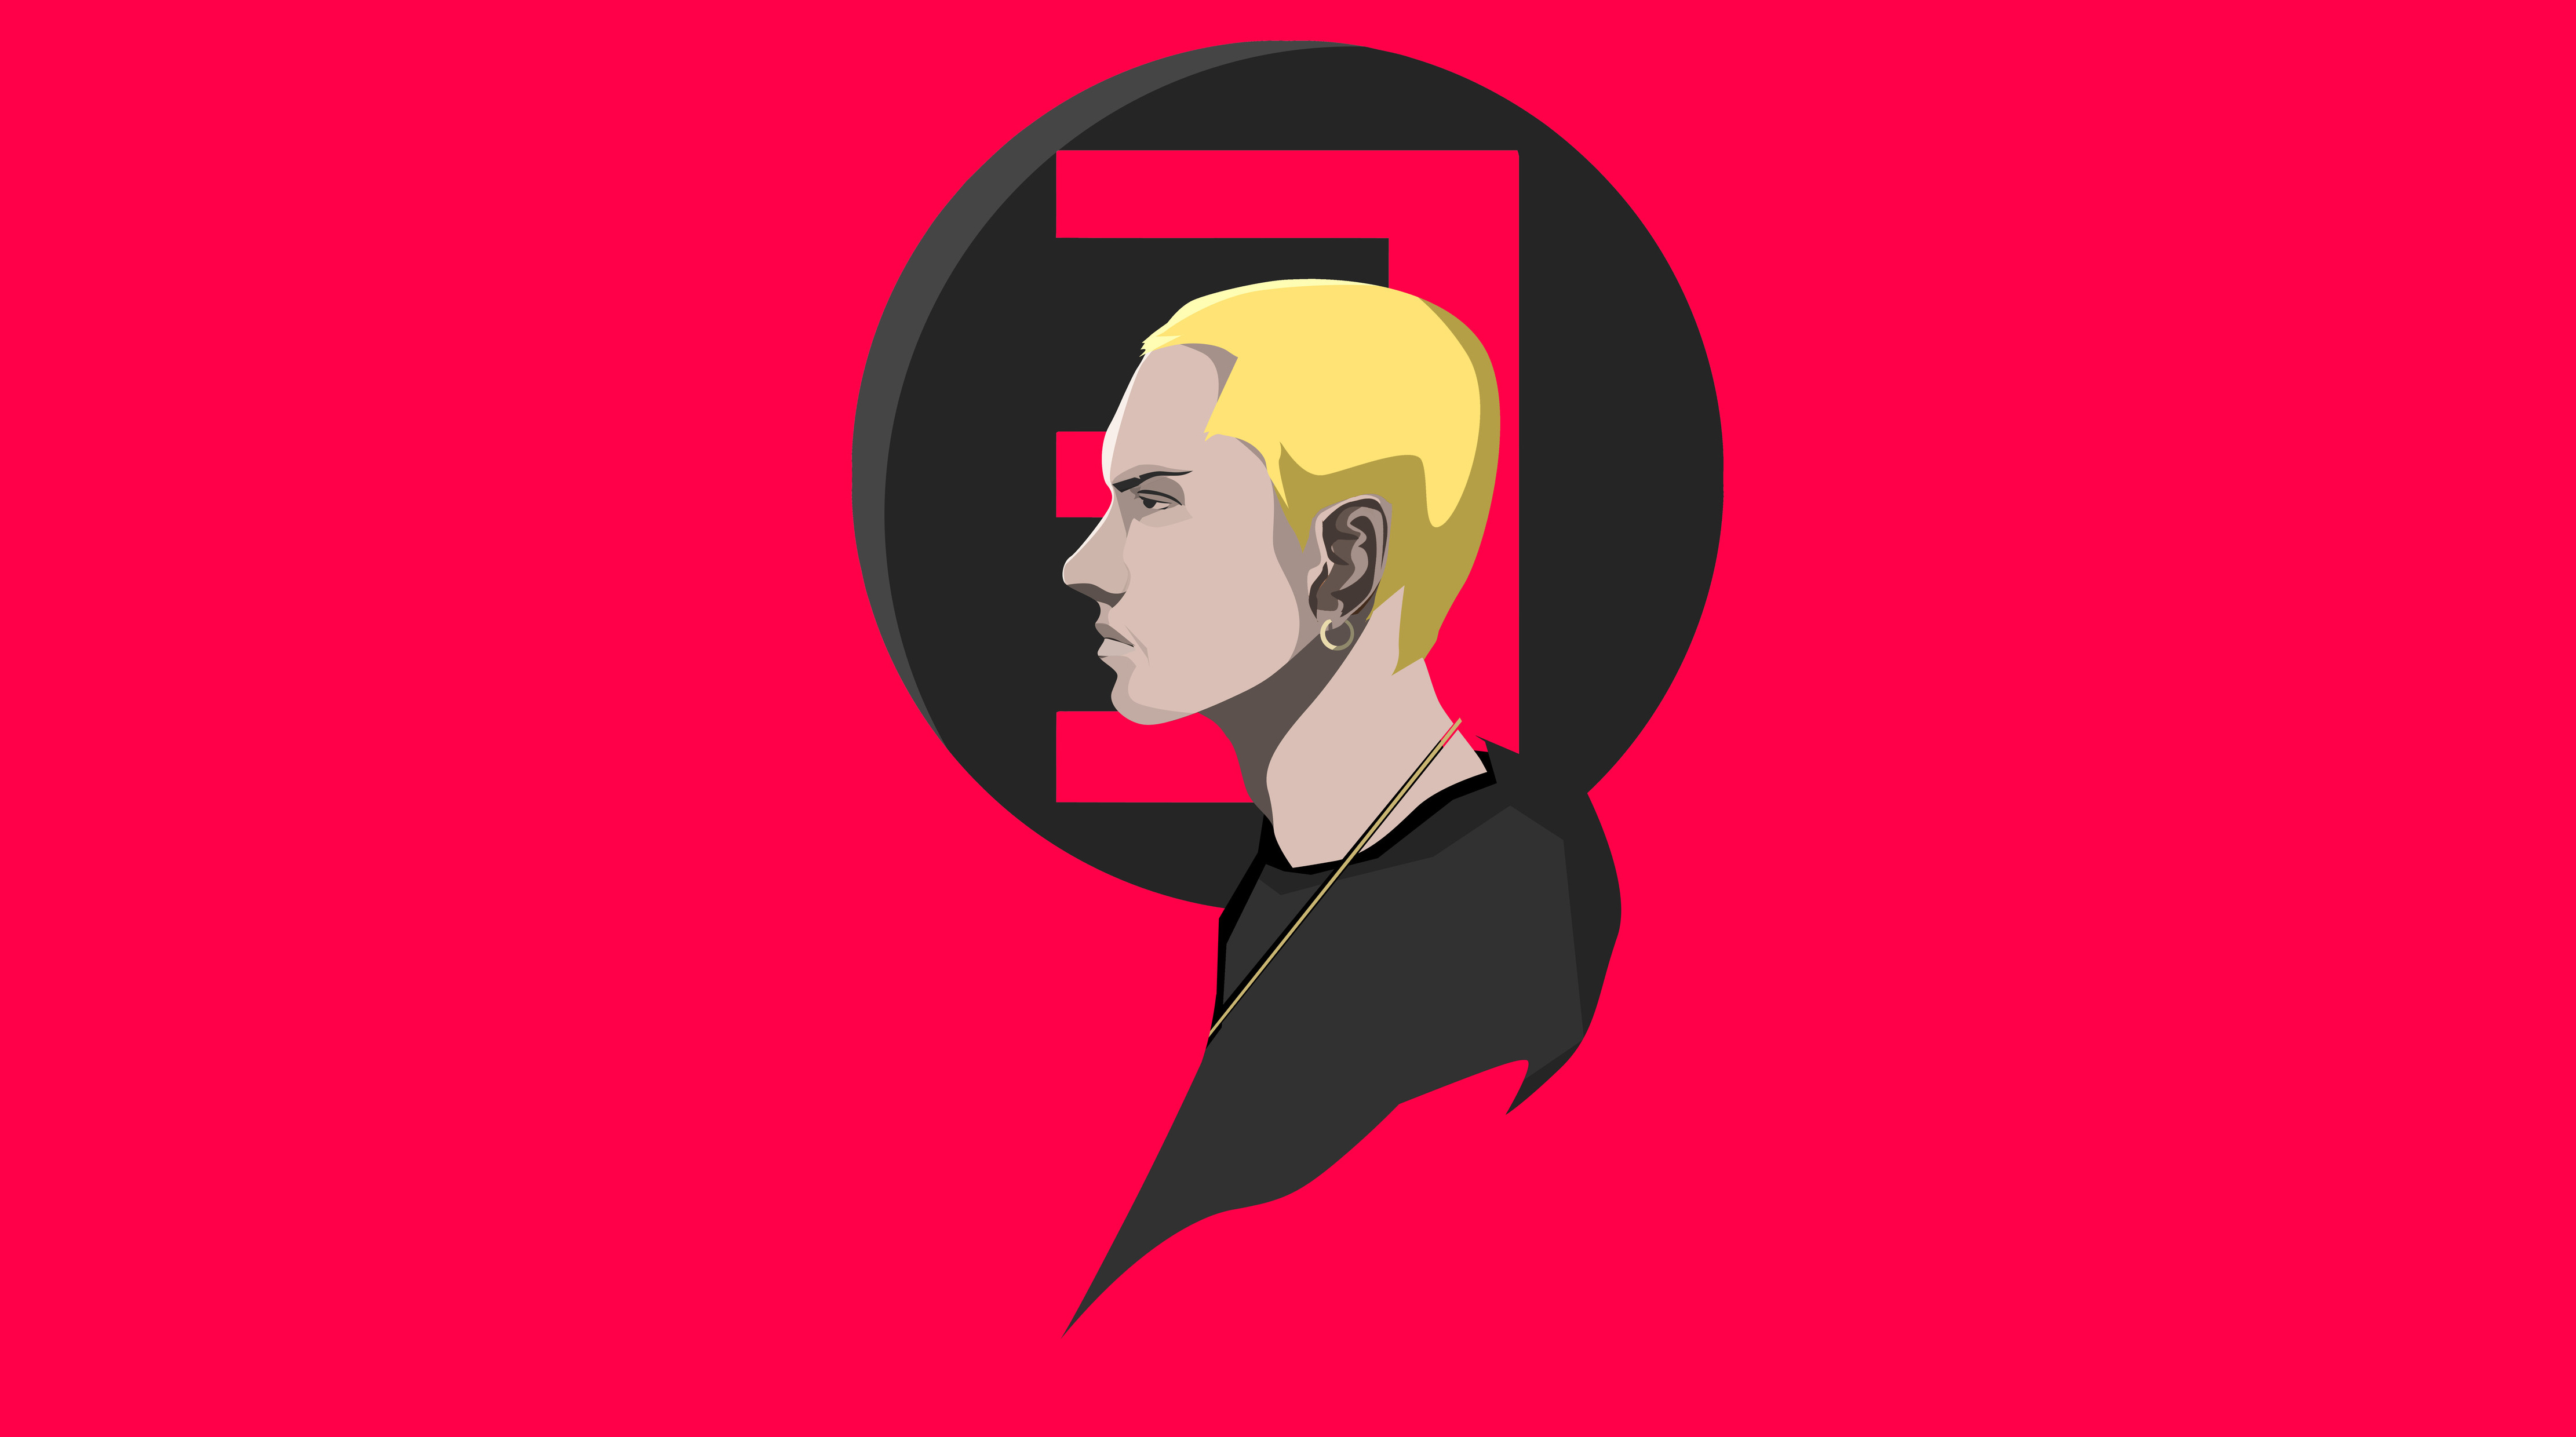 X eminem red minimal k nexus samsung galaxy tab note android tablets hd k wallpapers images backgrounds photos and pictures